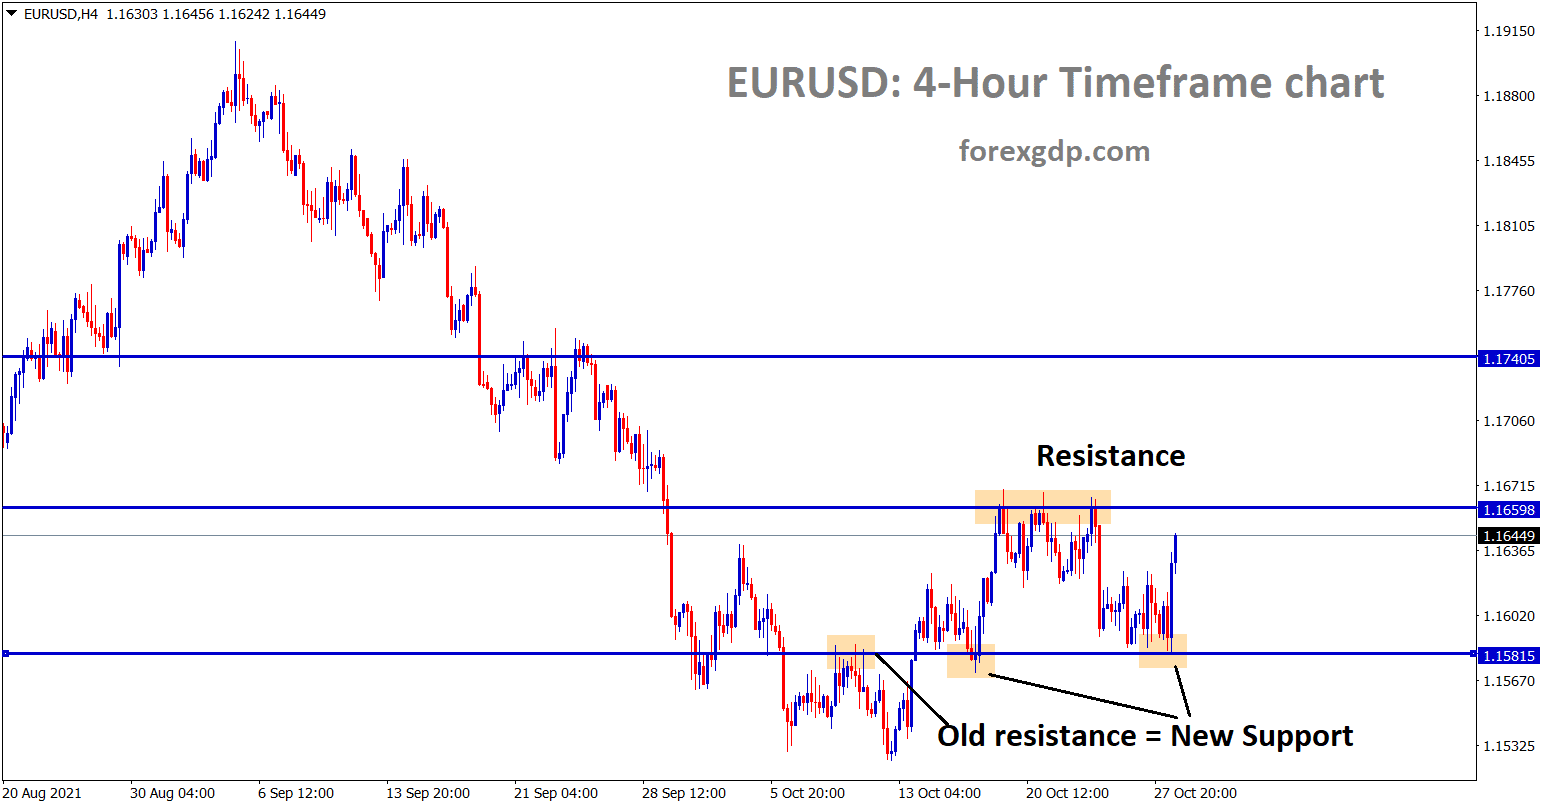 EURUSD is moving in a consolidation mode and the price is resistance and support area